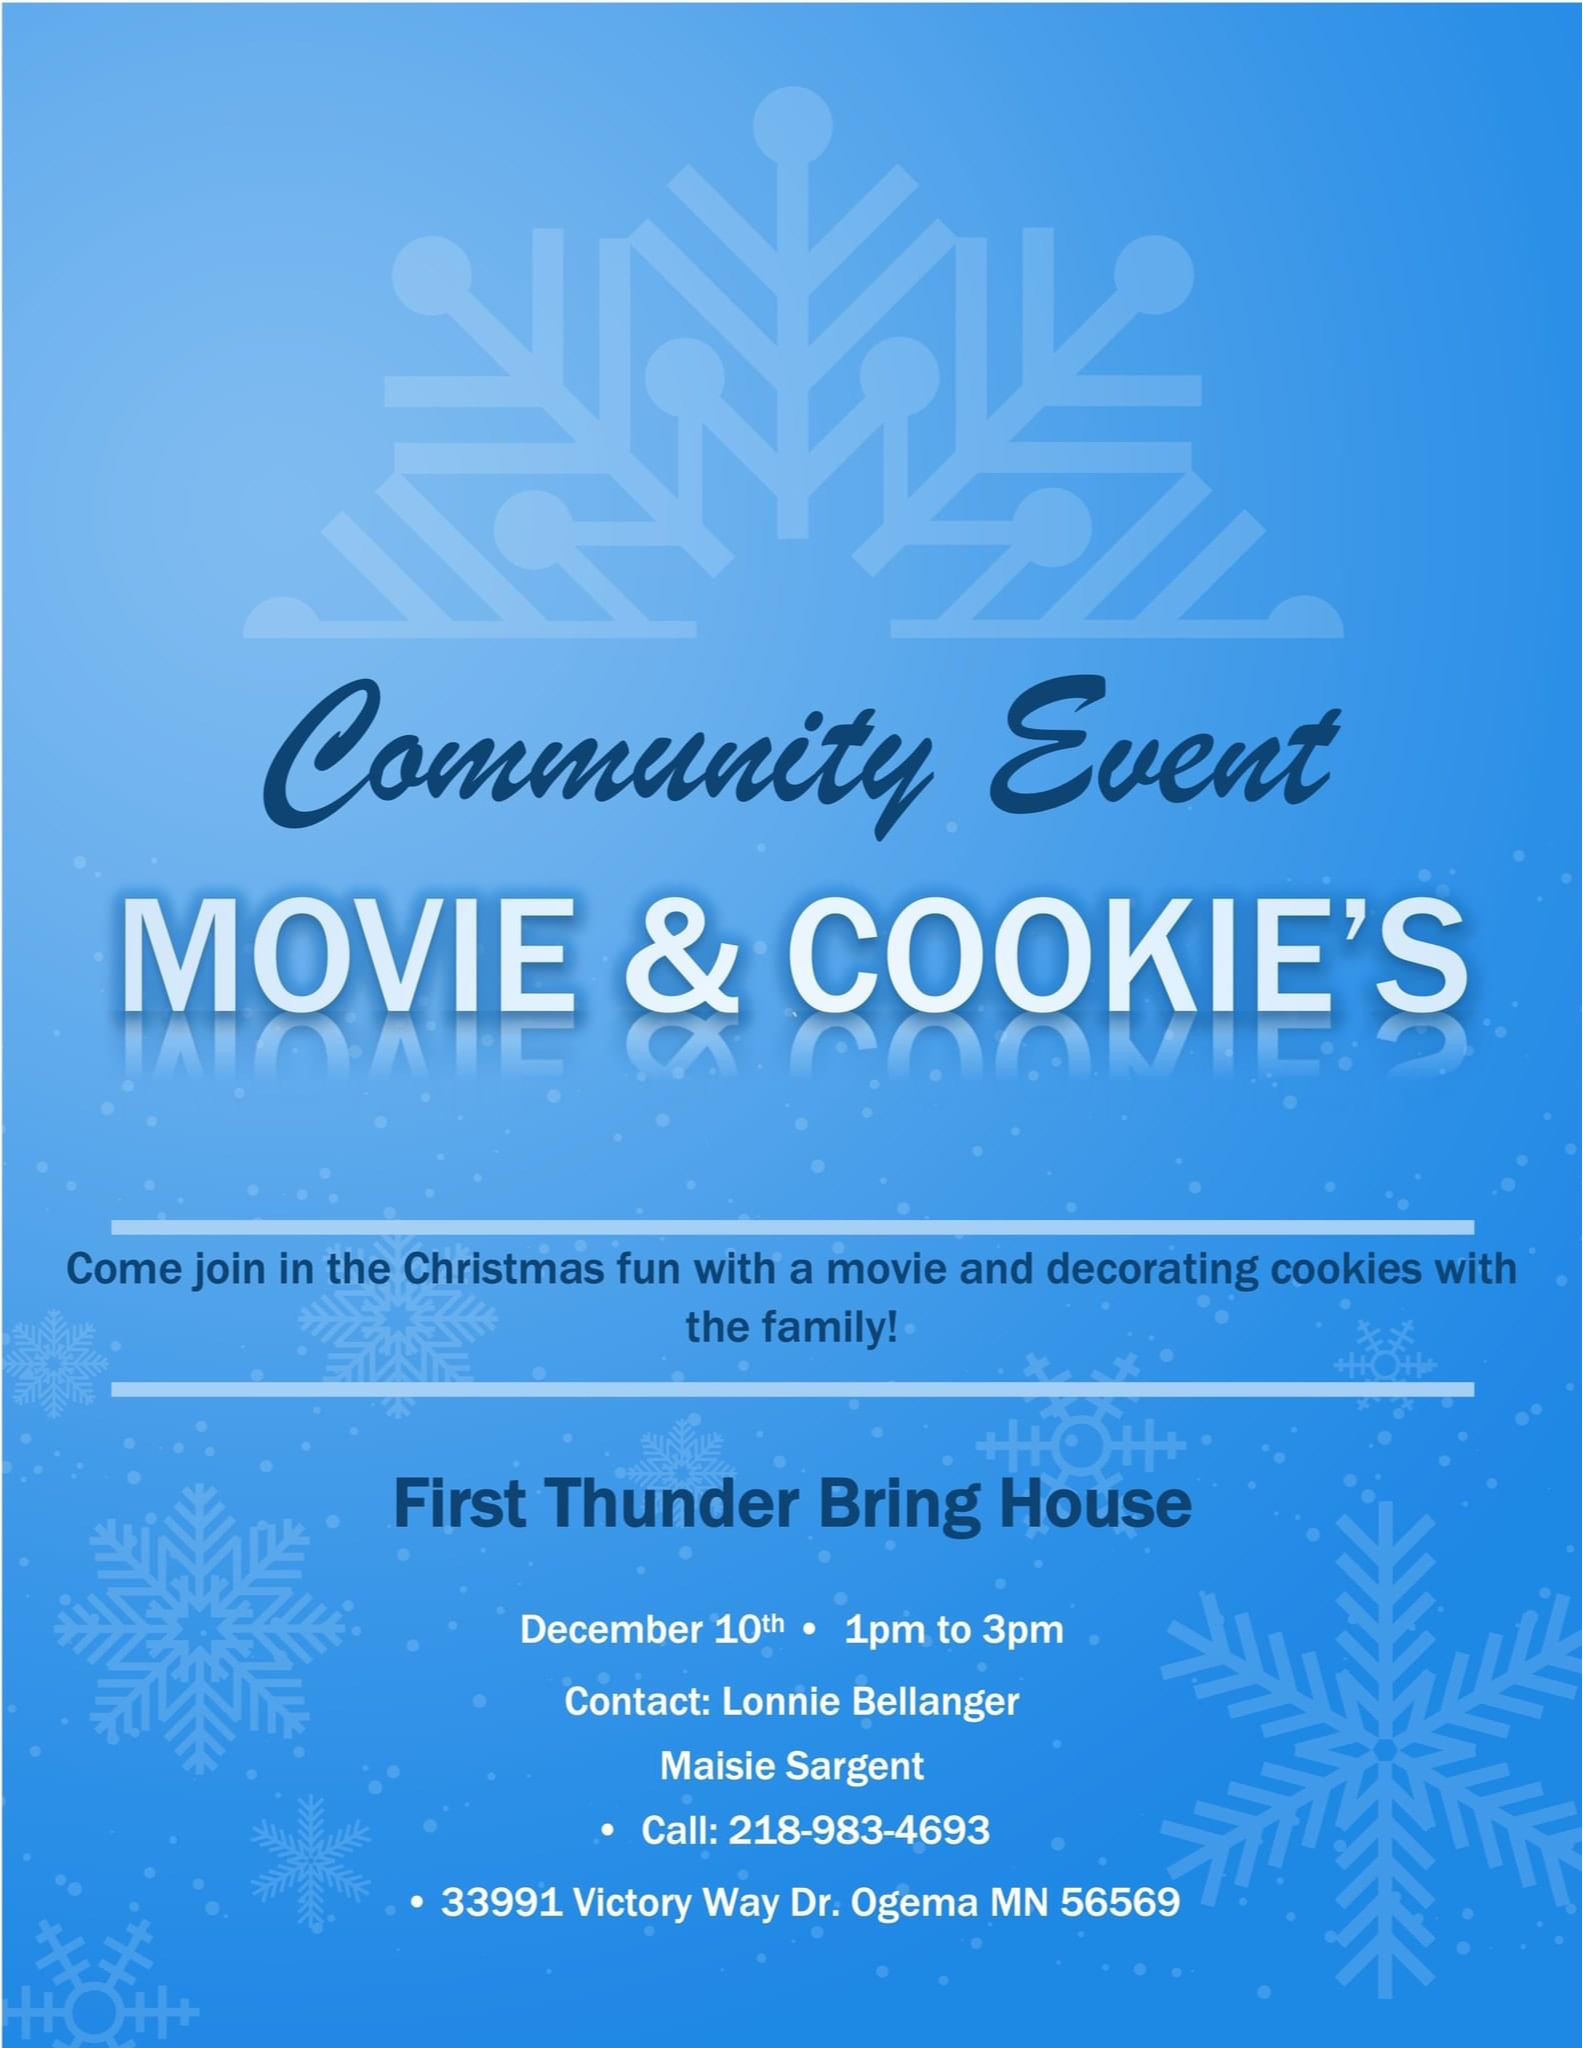 Community Event Movies and Cookies